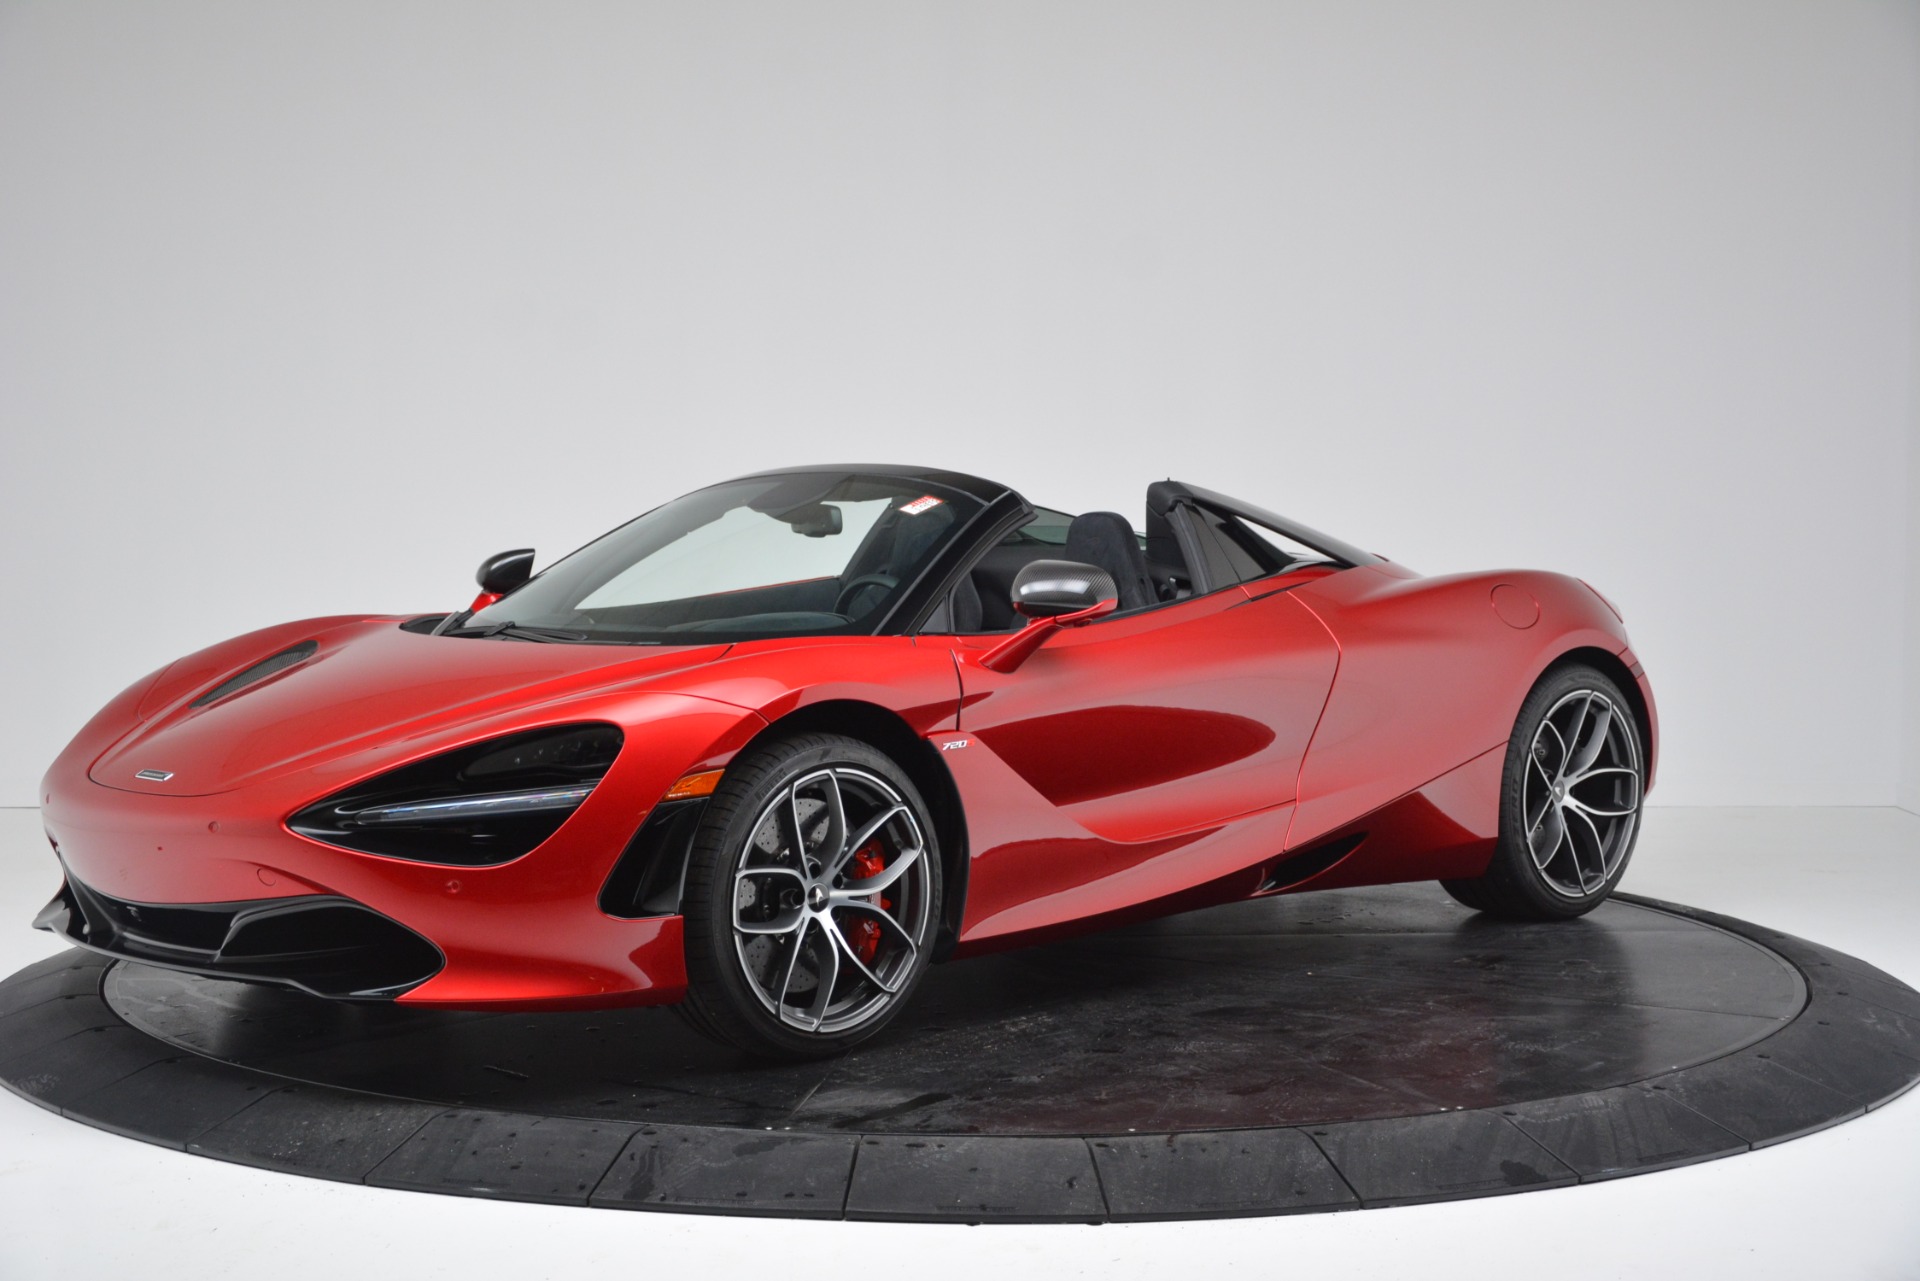 New 2020 McLaren 720S SPIDER Convertible for sale Sold at Aston Martin of Greenwich in Greenwich CT 06830 1